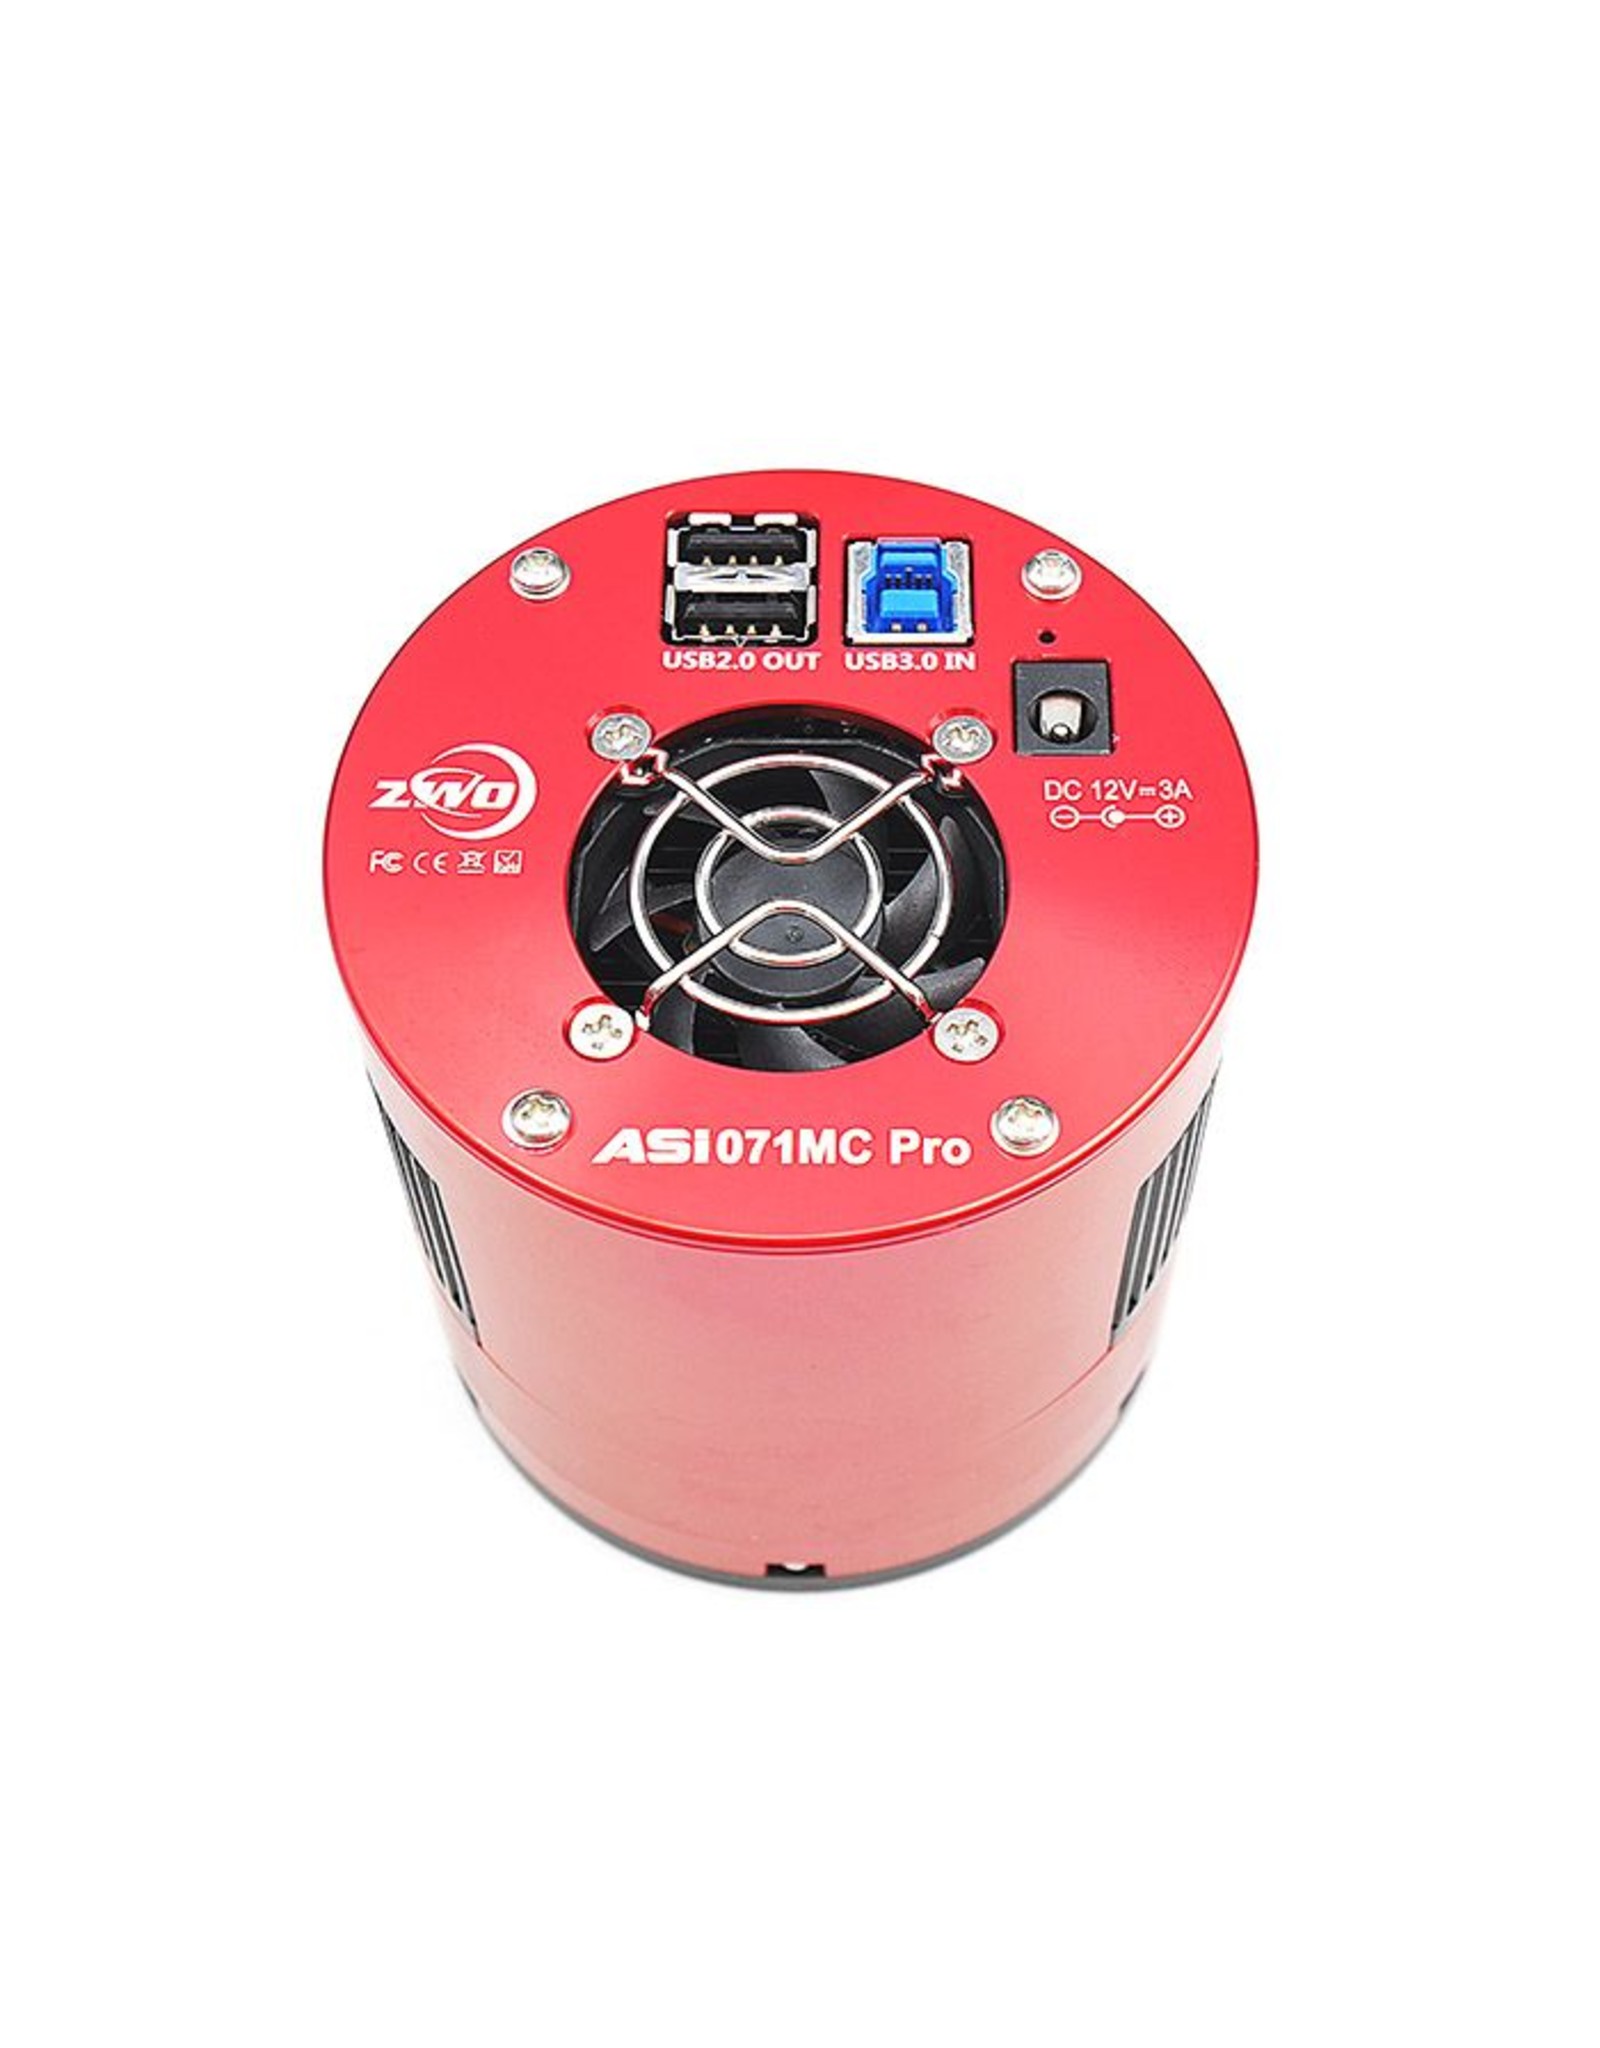 ZWO ZWO ASI071MC Pro (4.78 microns) Cooled Color Camera USB3.0